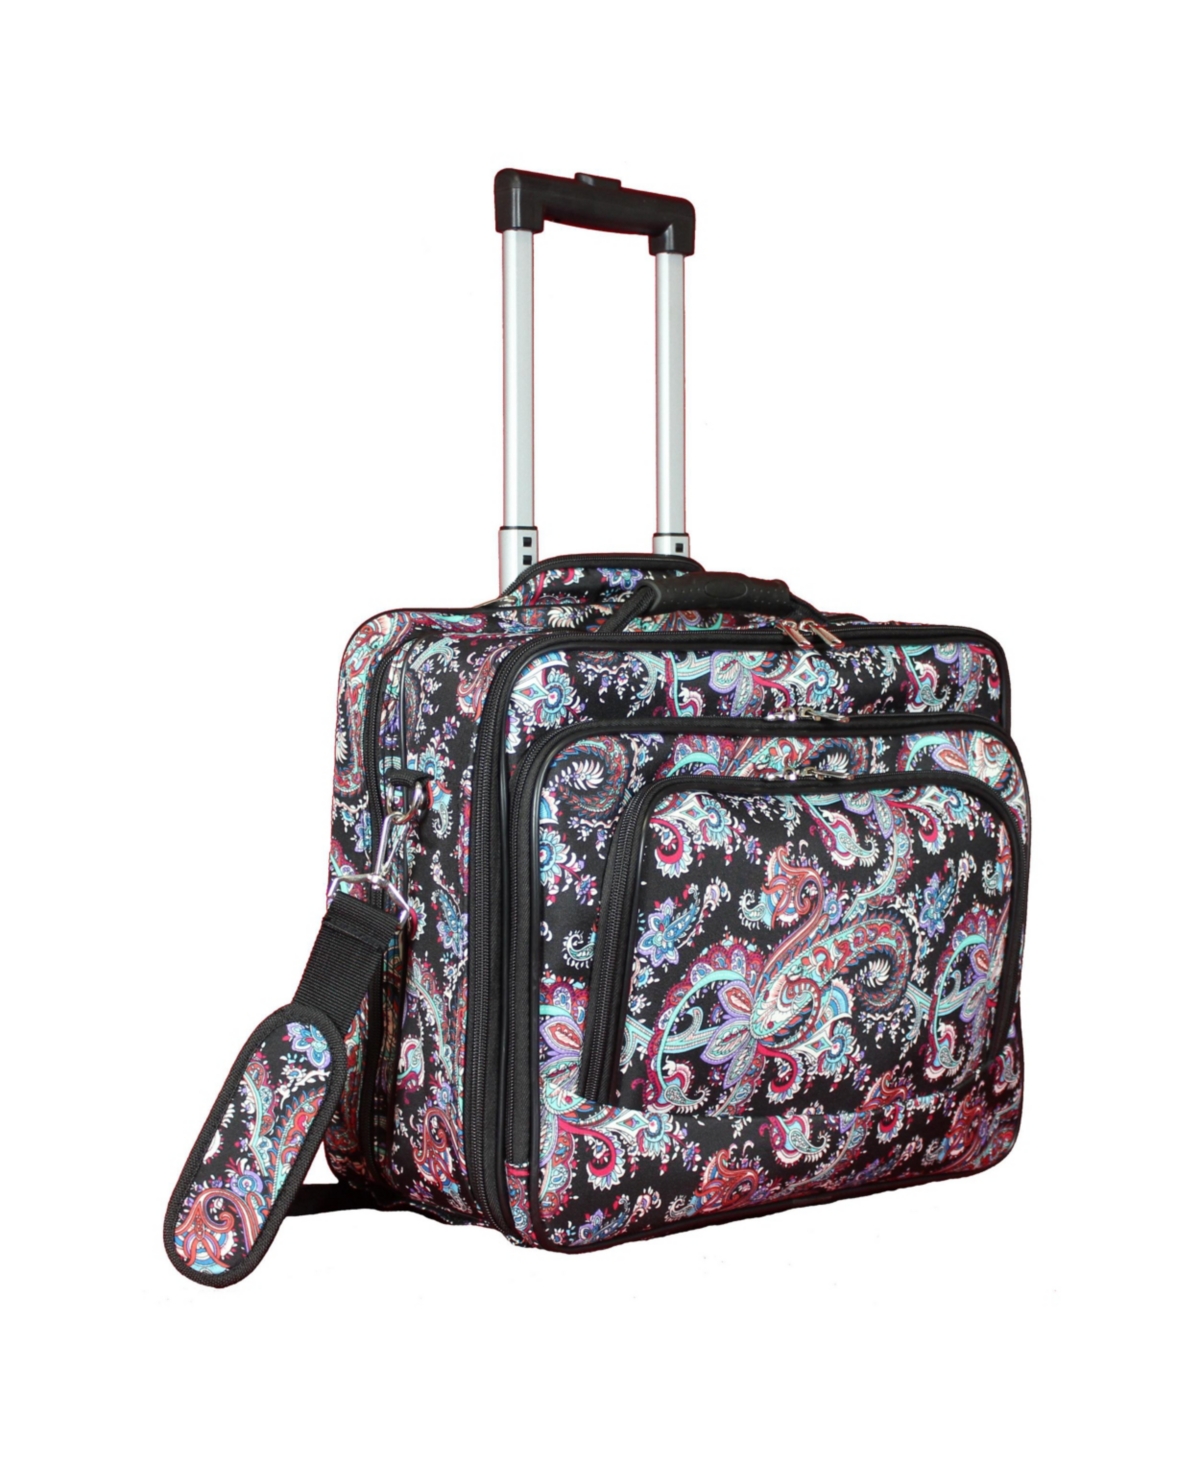 17-inch Rolling Laptop Case with Wheels and Handle - Paris pink